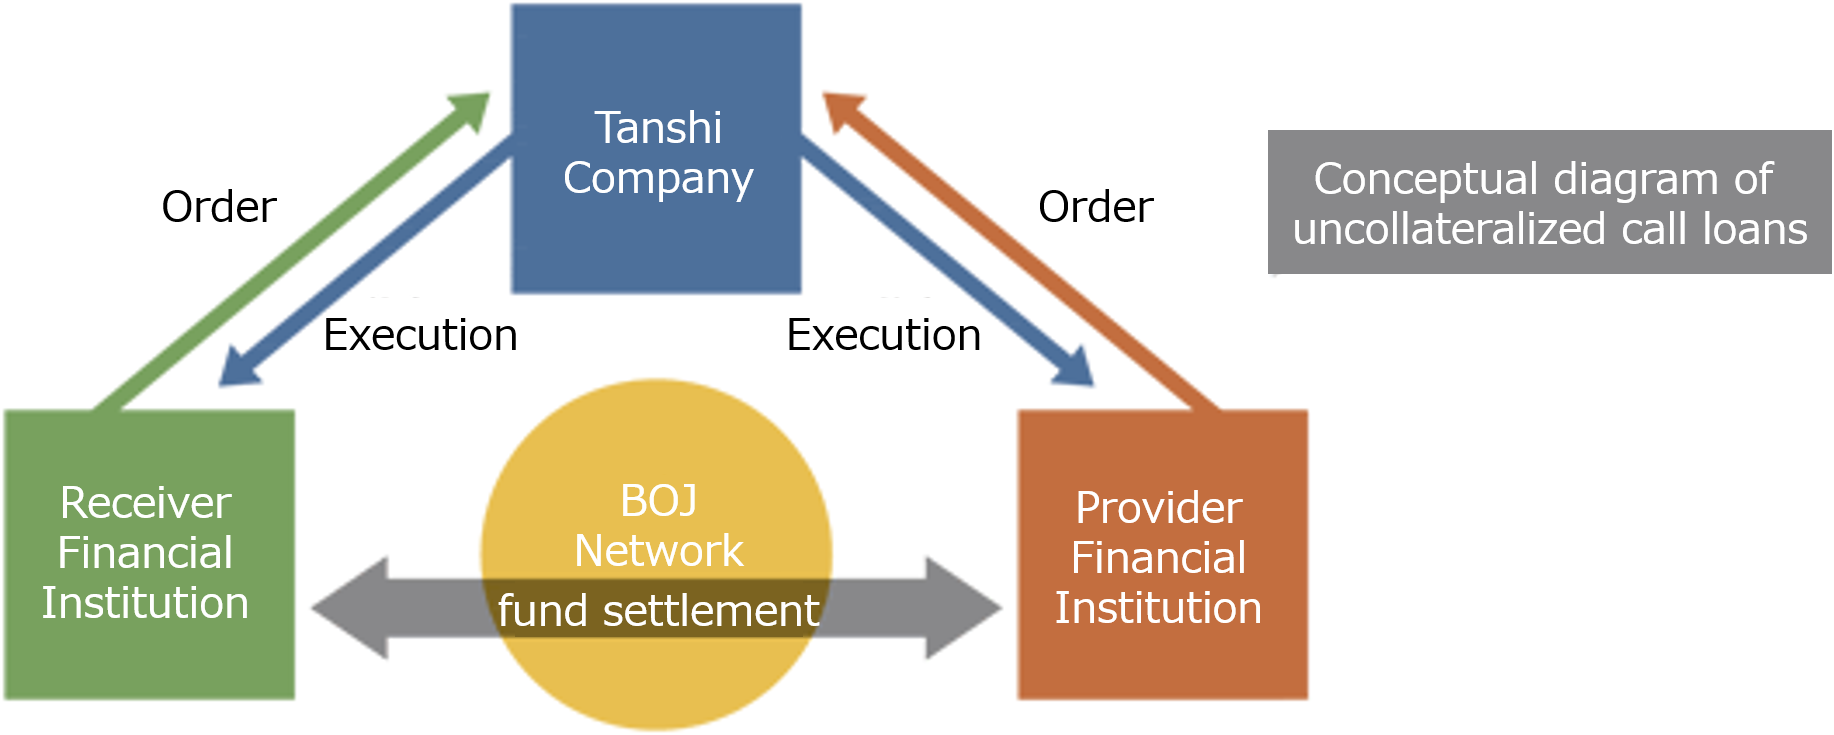 Conceptual diagram of uncollateralized call loans